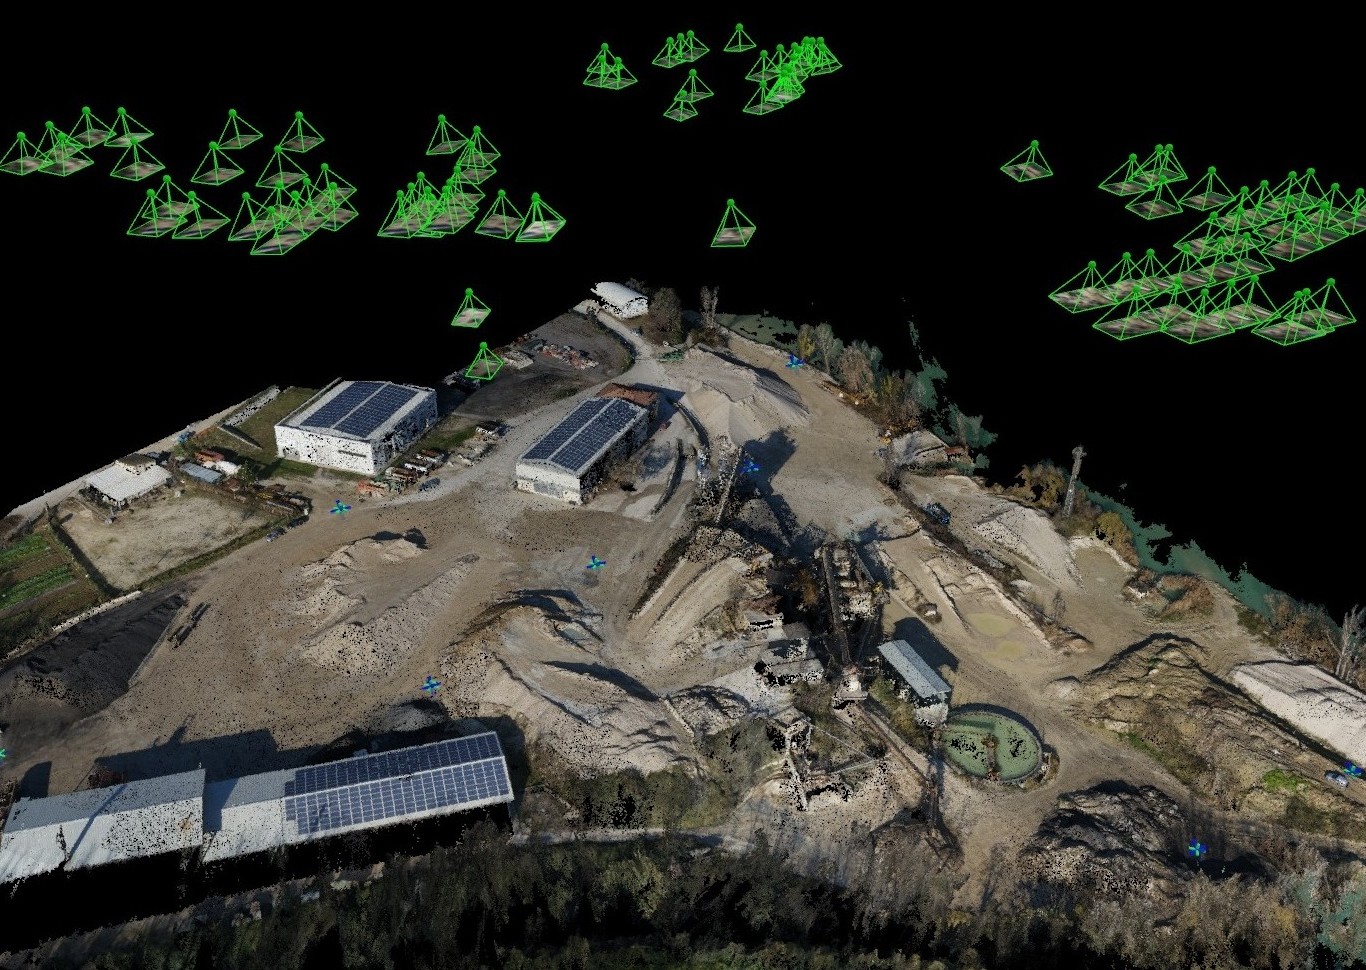 An aerial image of the stockpiles, showing the rayCloud.